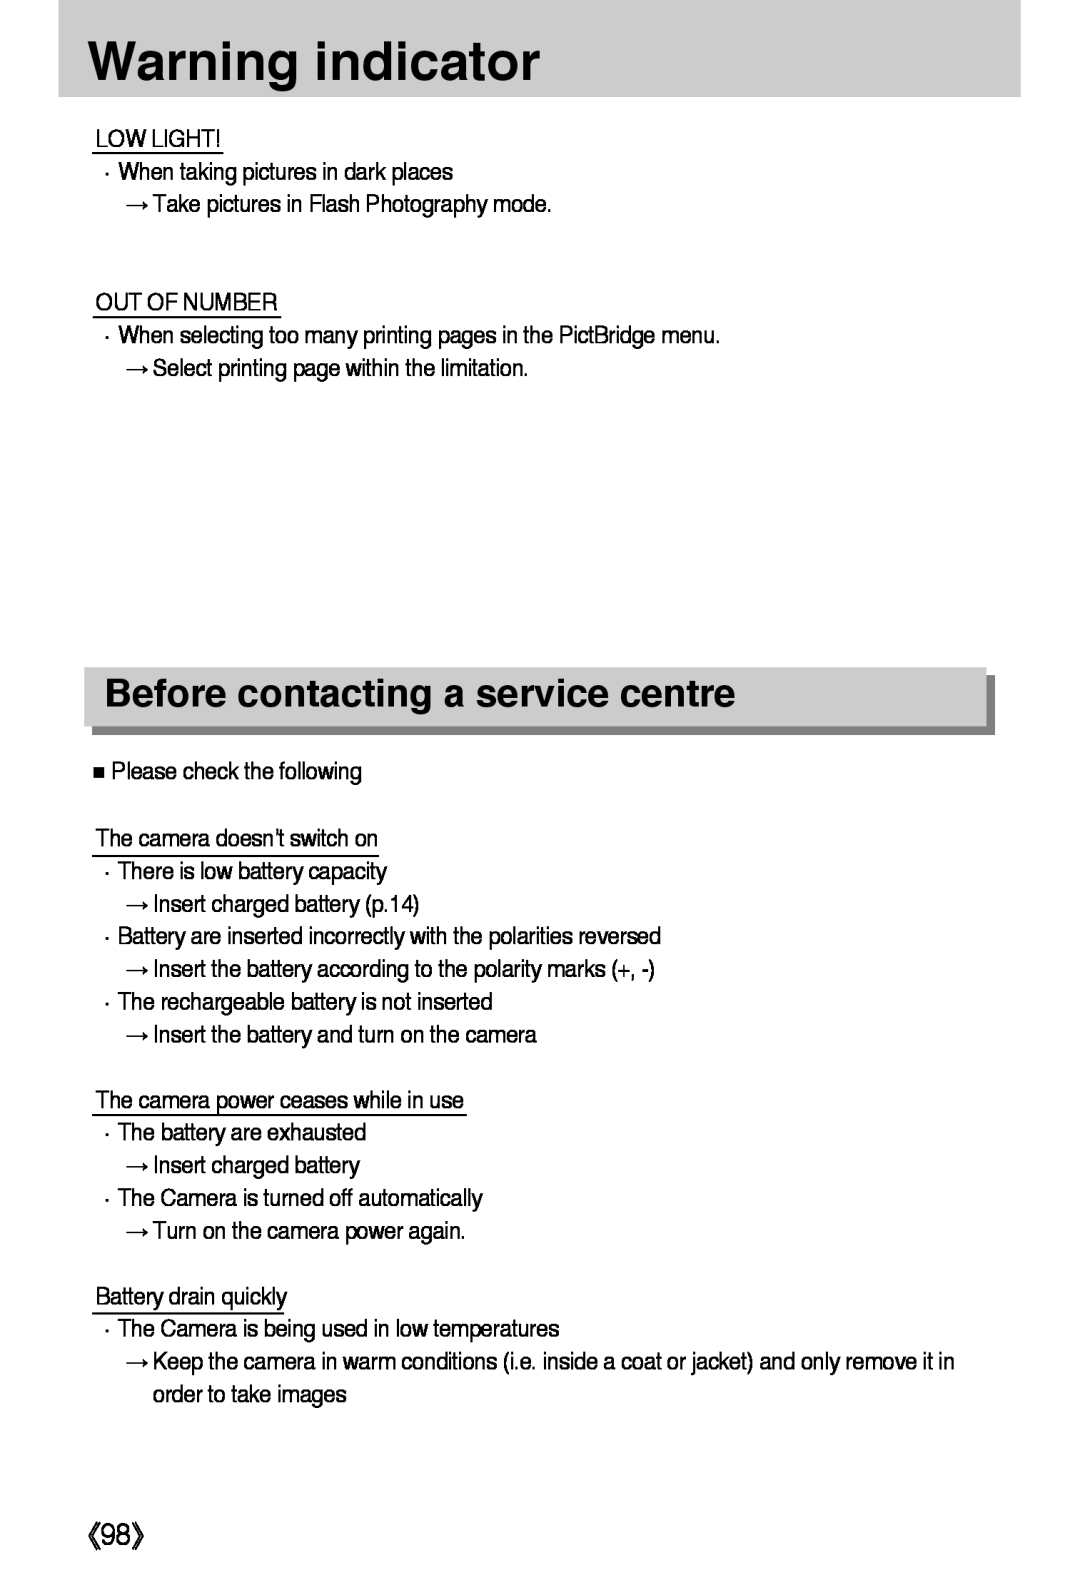 Samsung L50 user manual Before contacting a service centre, 《98》, Warning indicator 